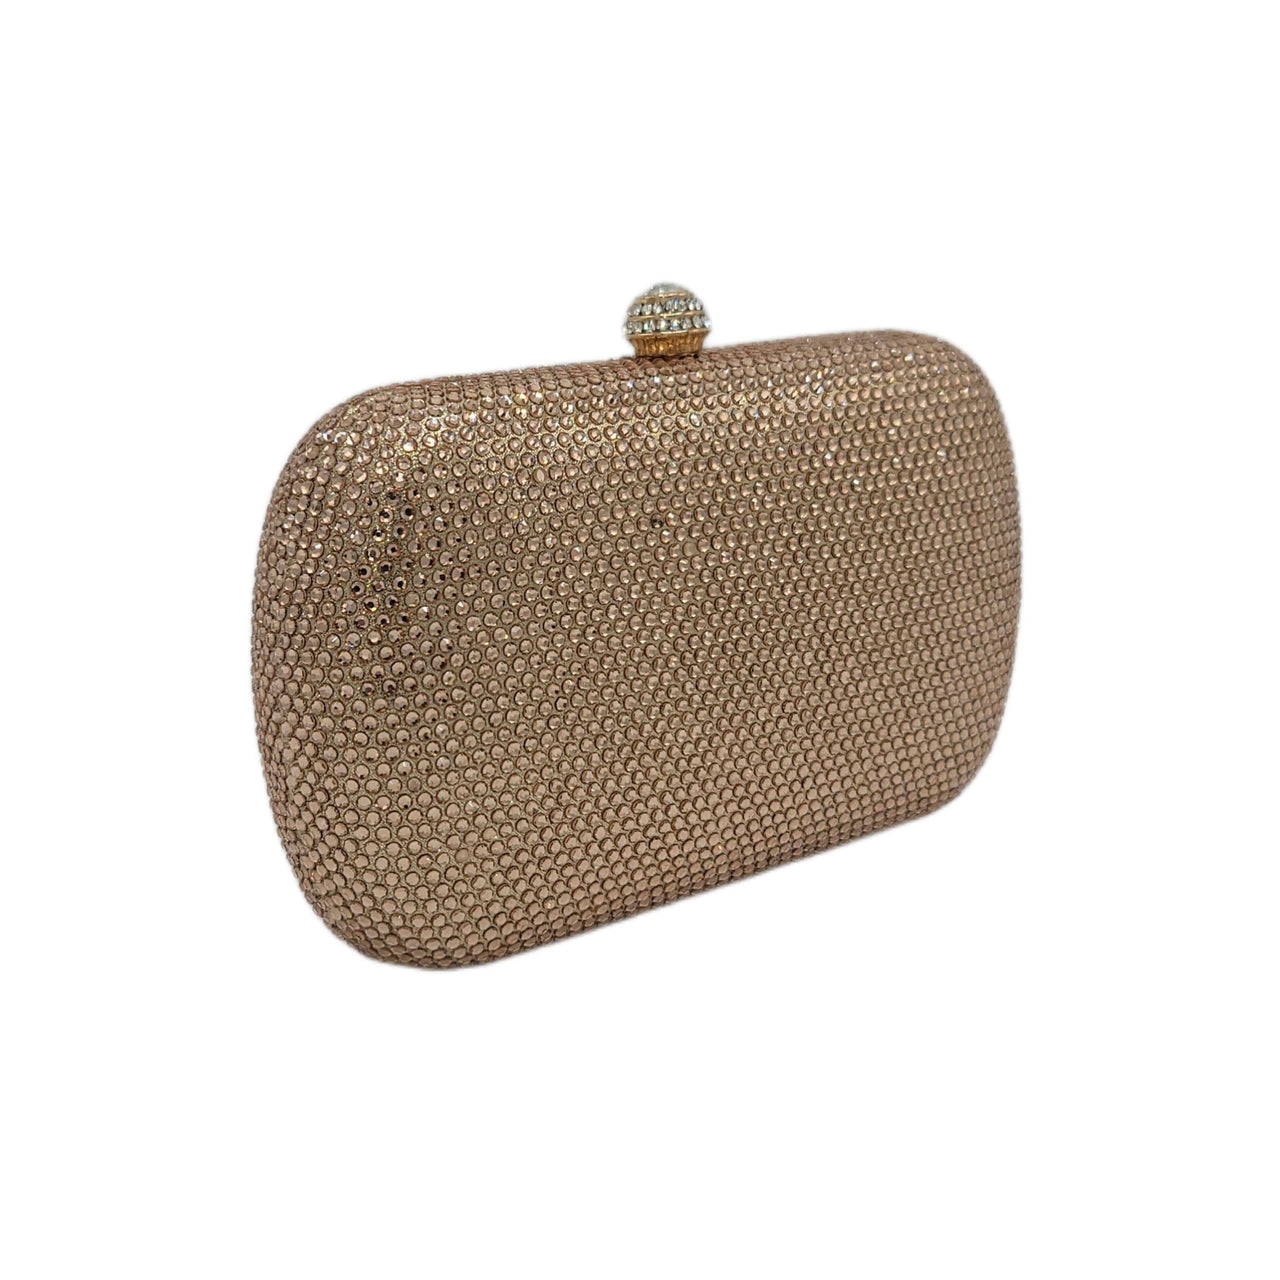 The Bag Couture Handbags, Wallets & Cases Stone Embellished Clutch 1 Golden